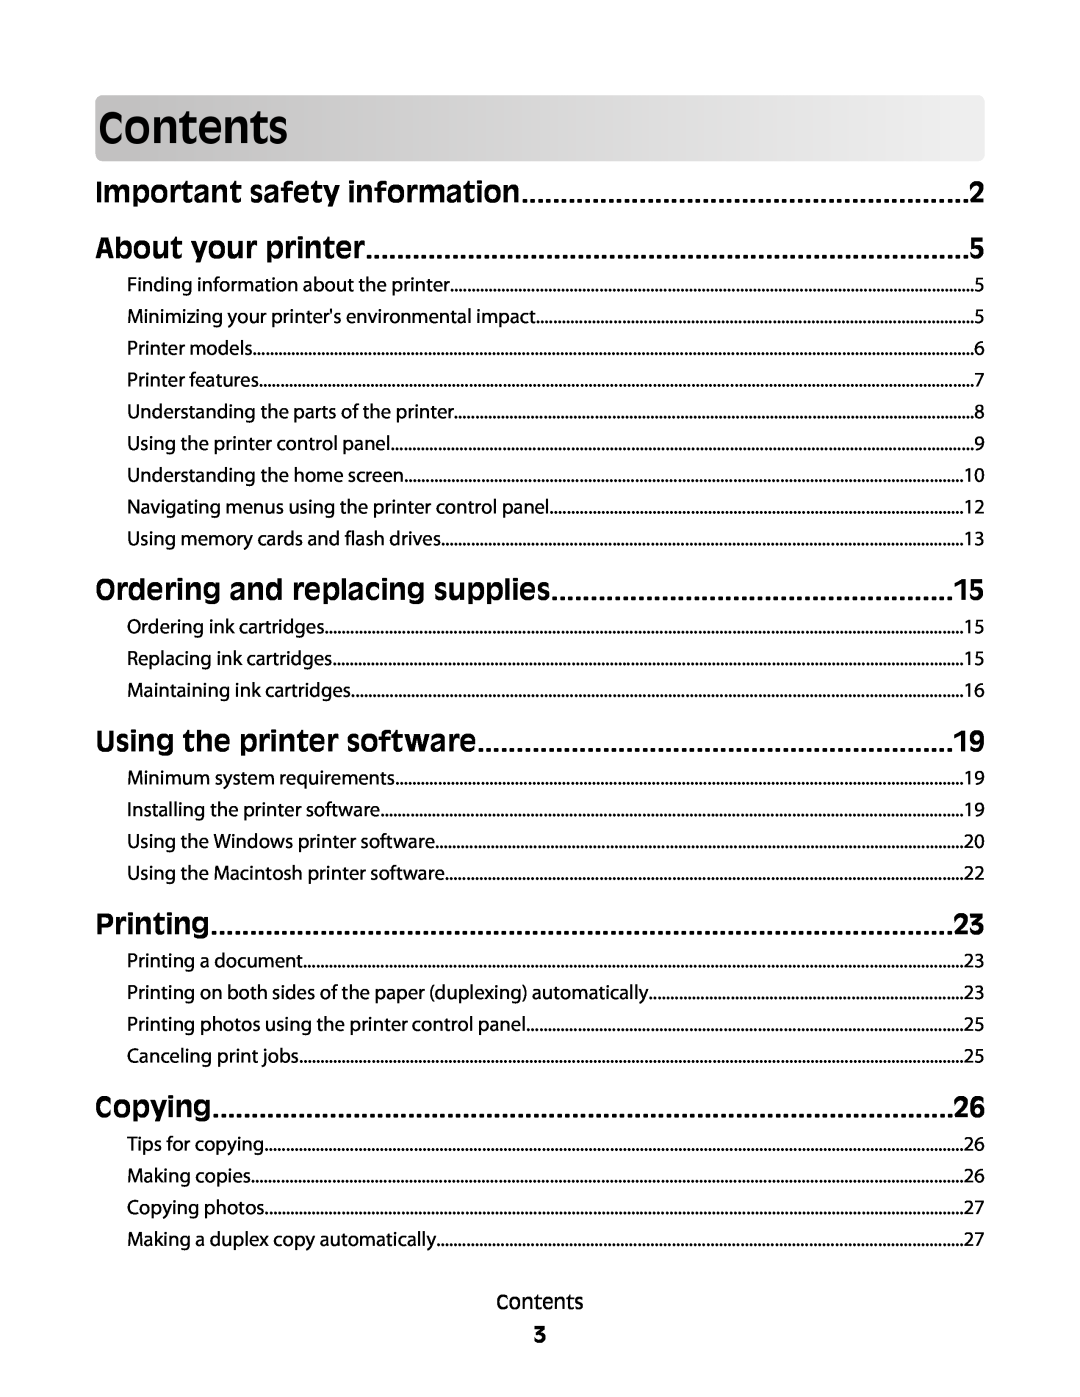 Lexmark Pro800 manual Contents, Important safety information, About your printer, Ordering and replacing supplies, Printing 